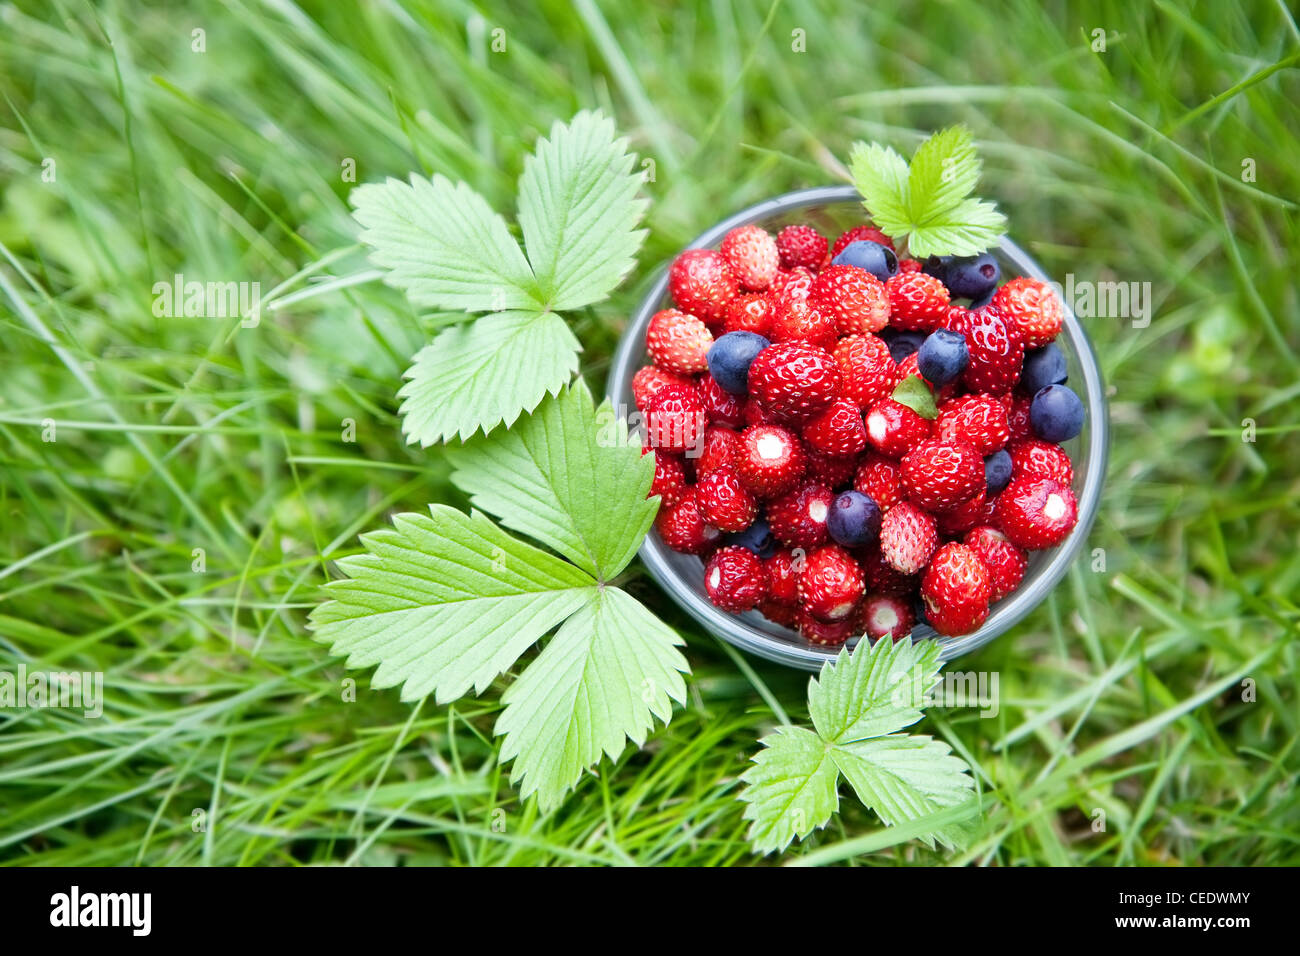 Summer and healthy food concept - small glass full of fresh forest berries (strawberries and blueberries) on a green lawn Stock Photo